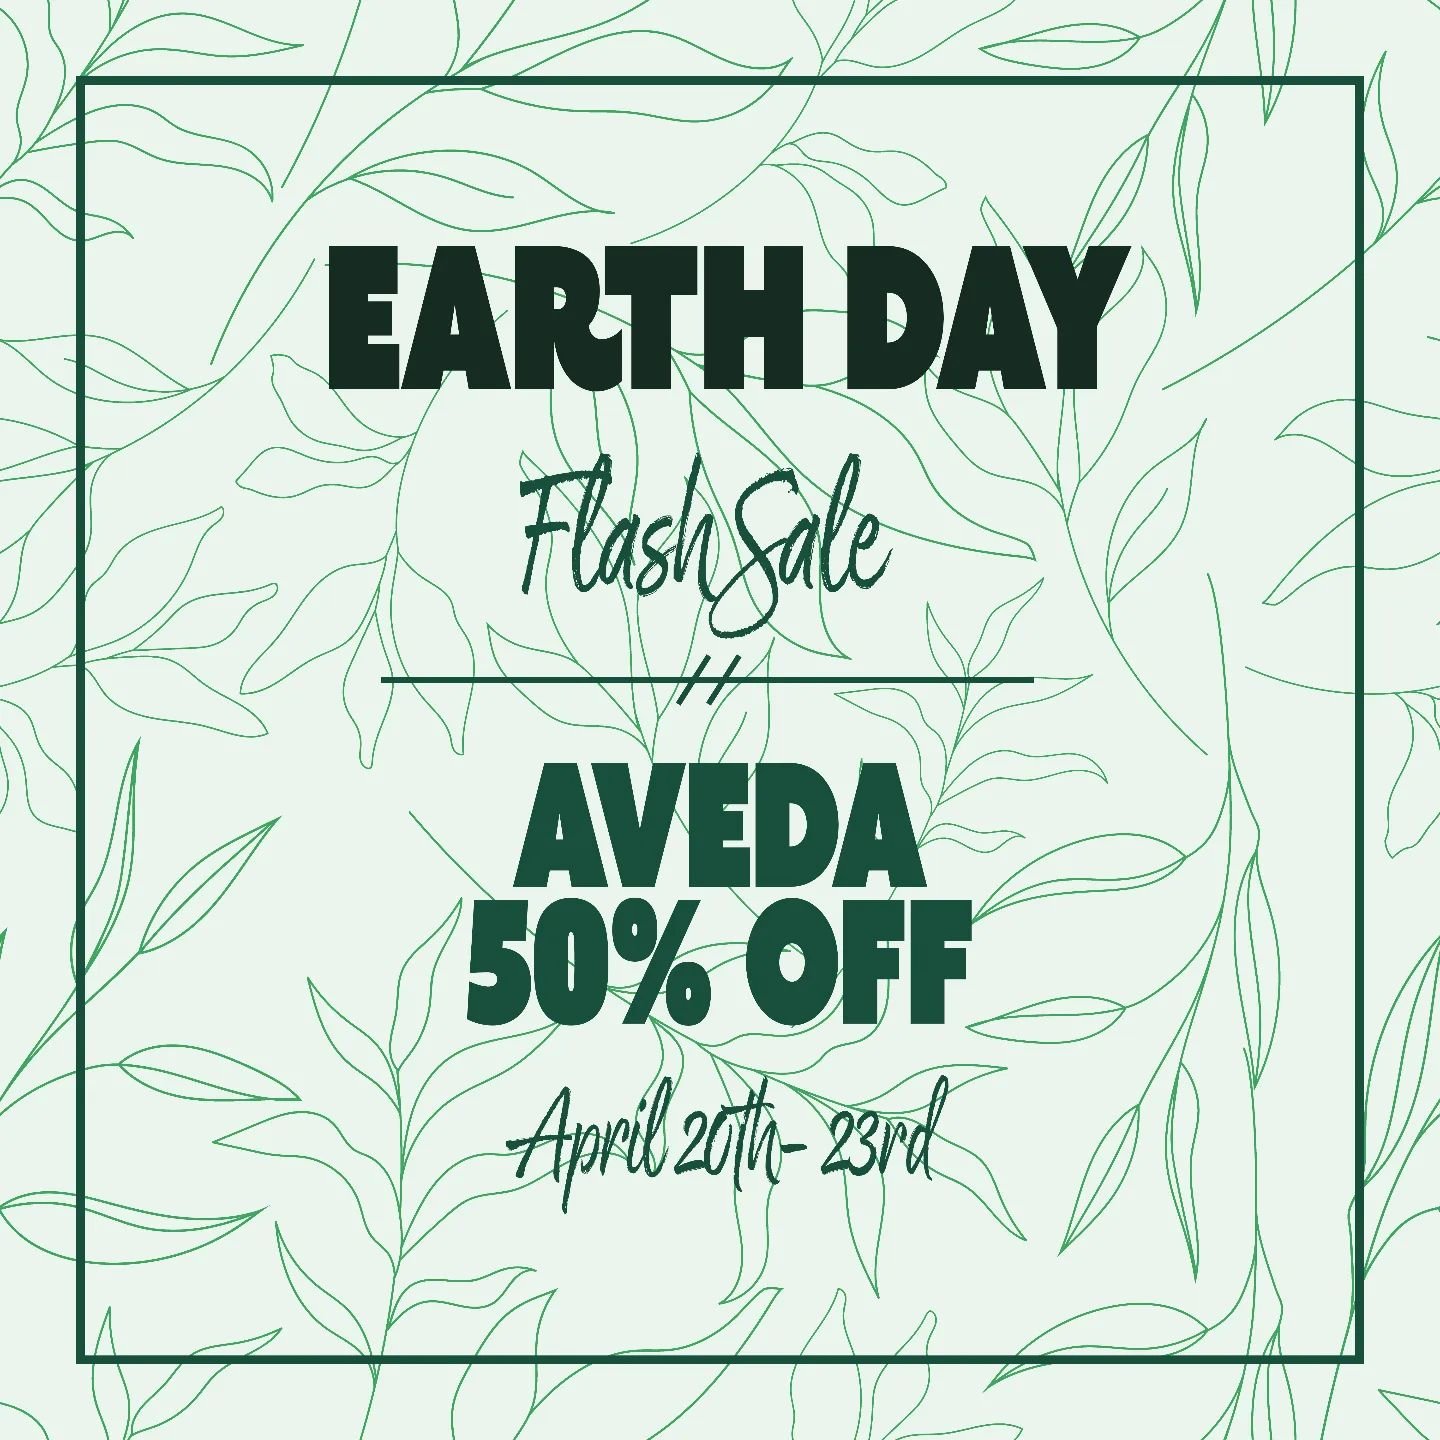 In honor of Earth Day we are doing an Aveda Flash Sale! All Aveda products are 50% Off. Starting tomorrow through Wednesday!